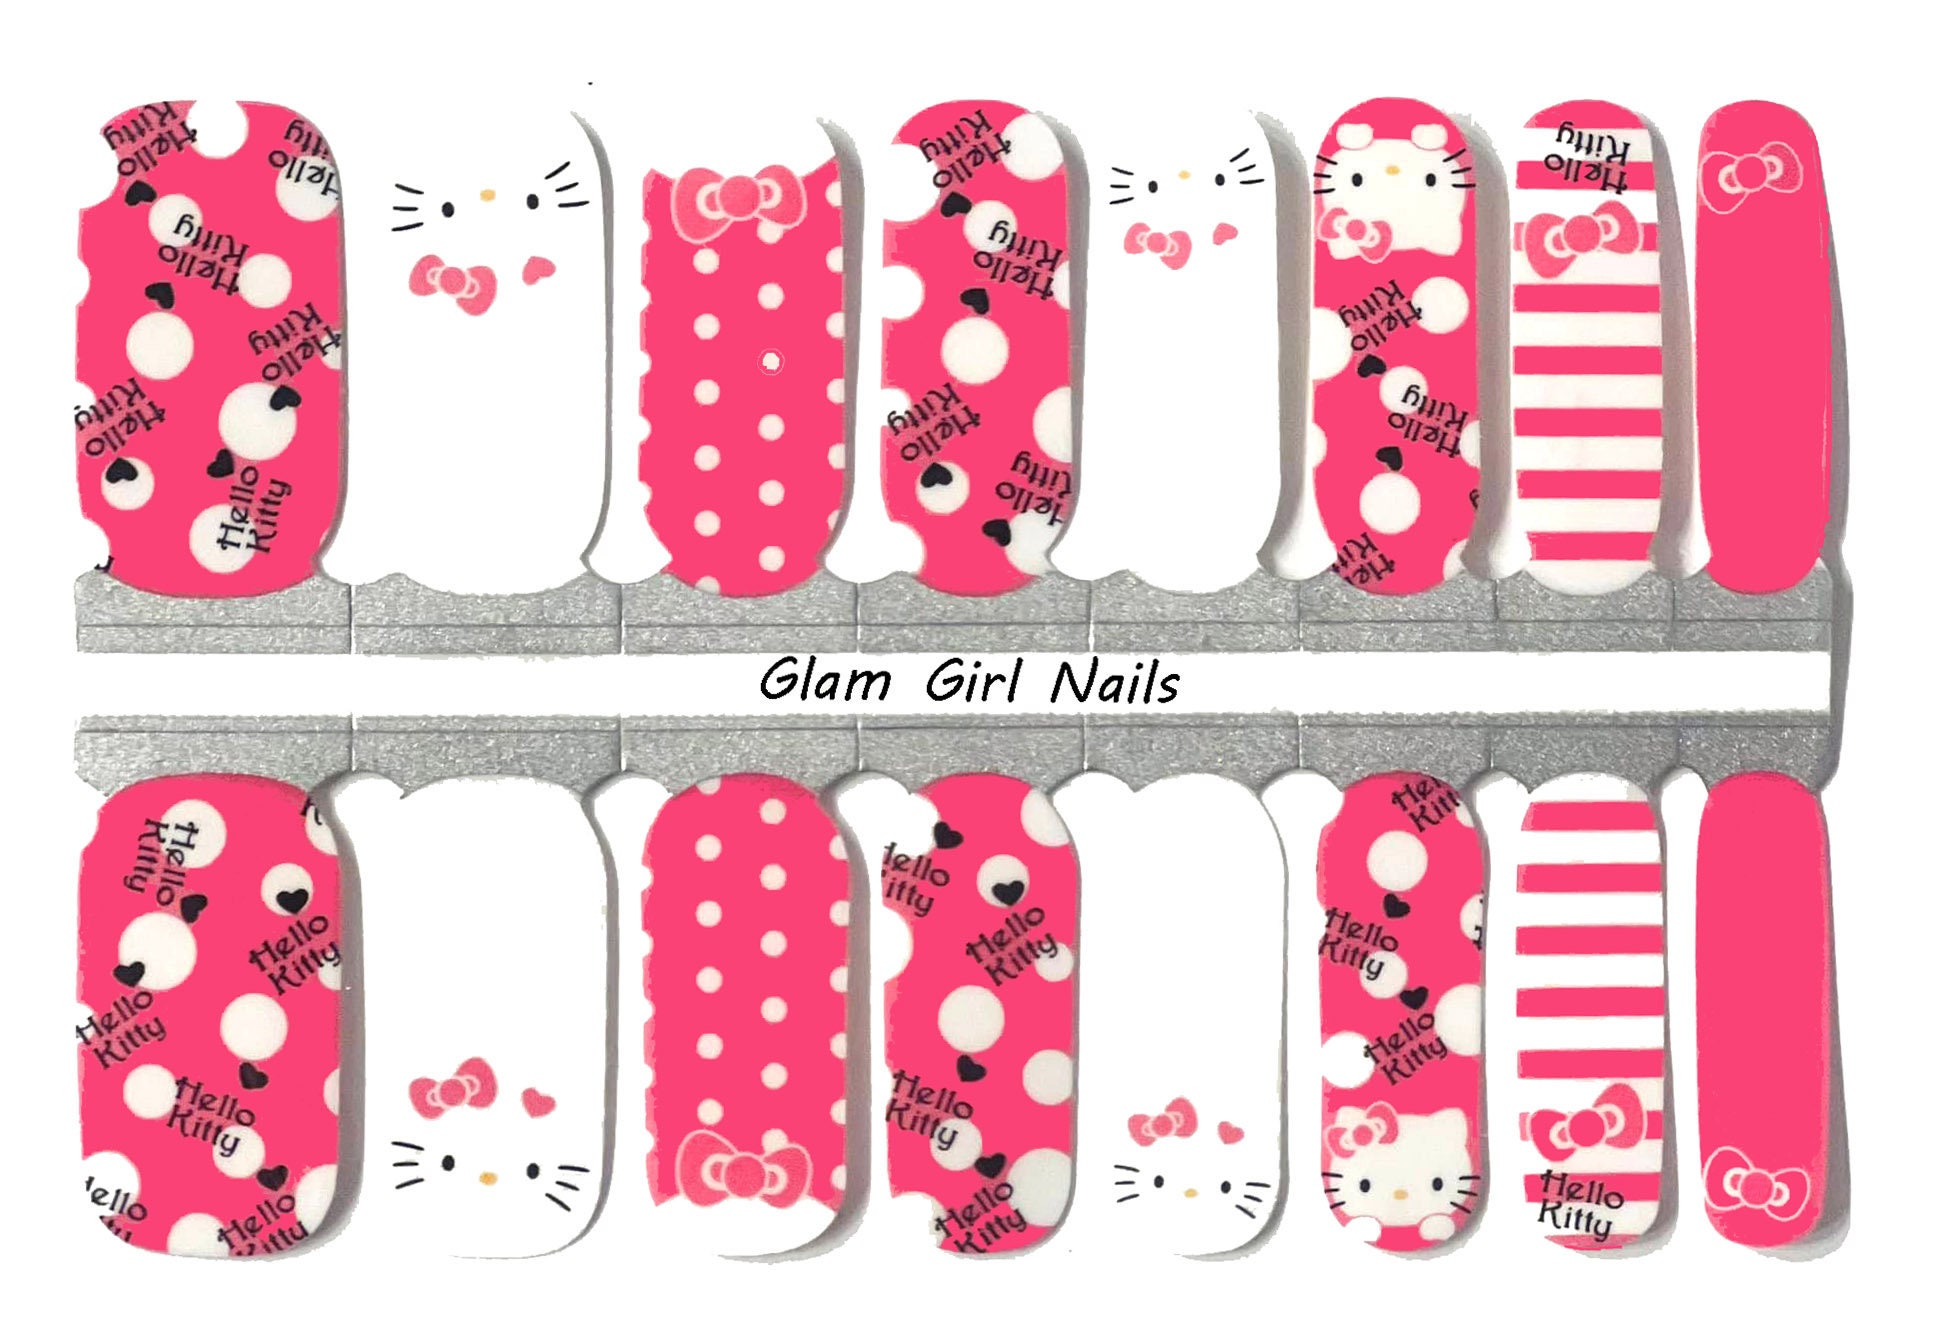 Light Pink Ever After Nail Wraps / Disney Nails 